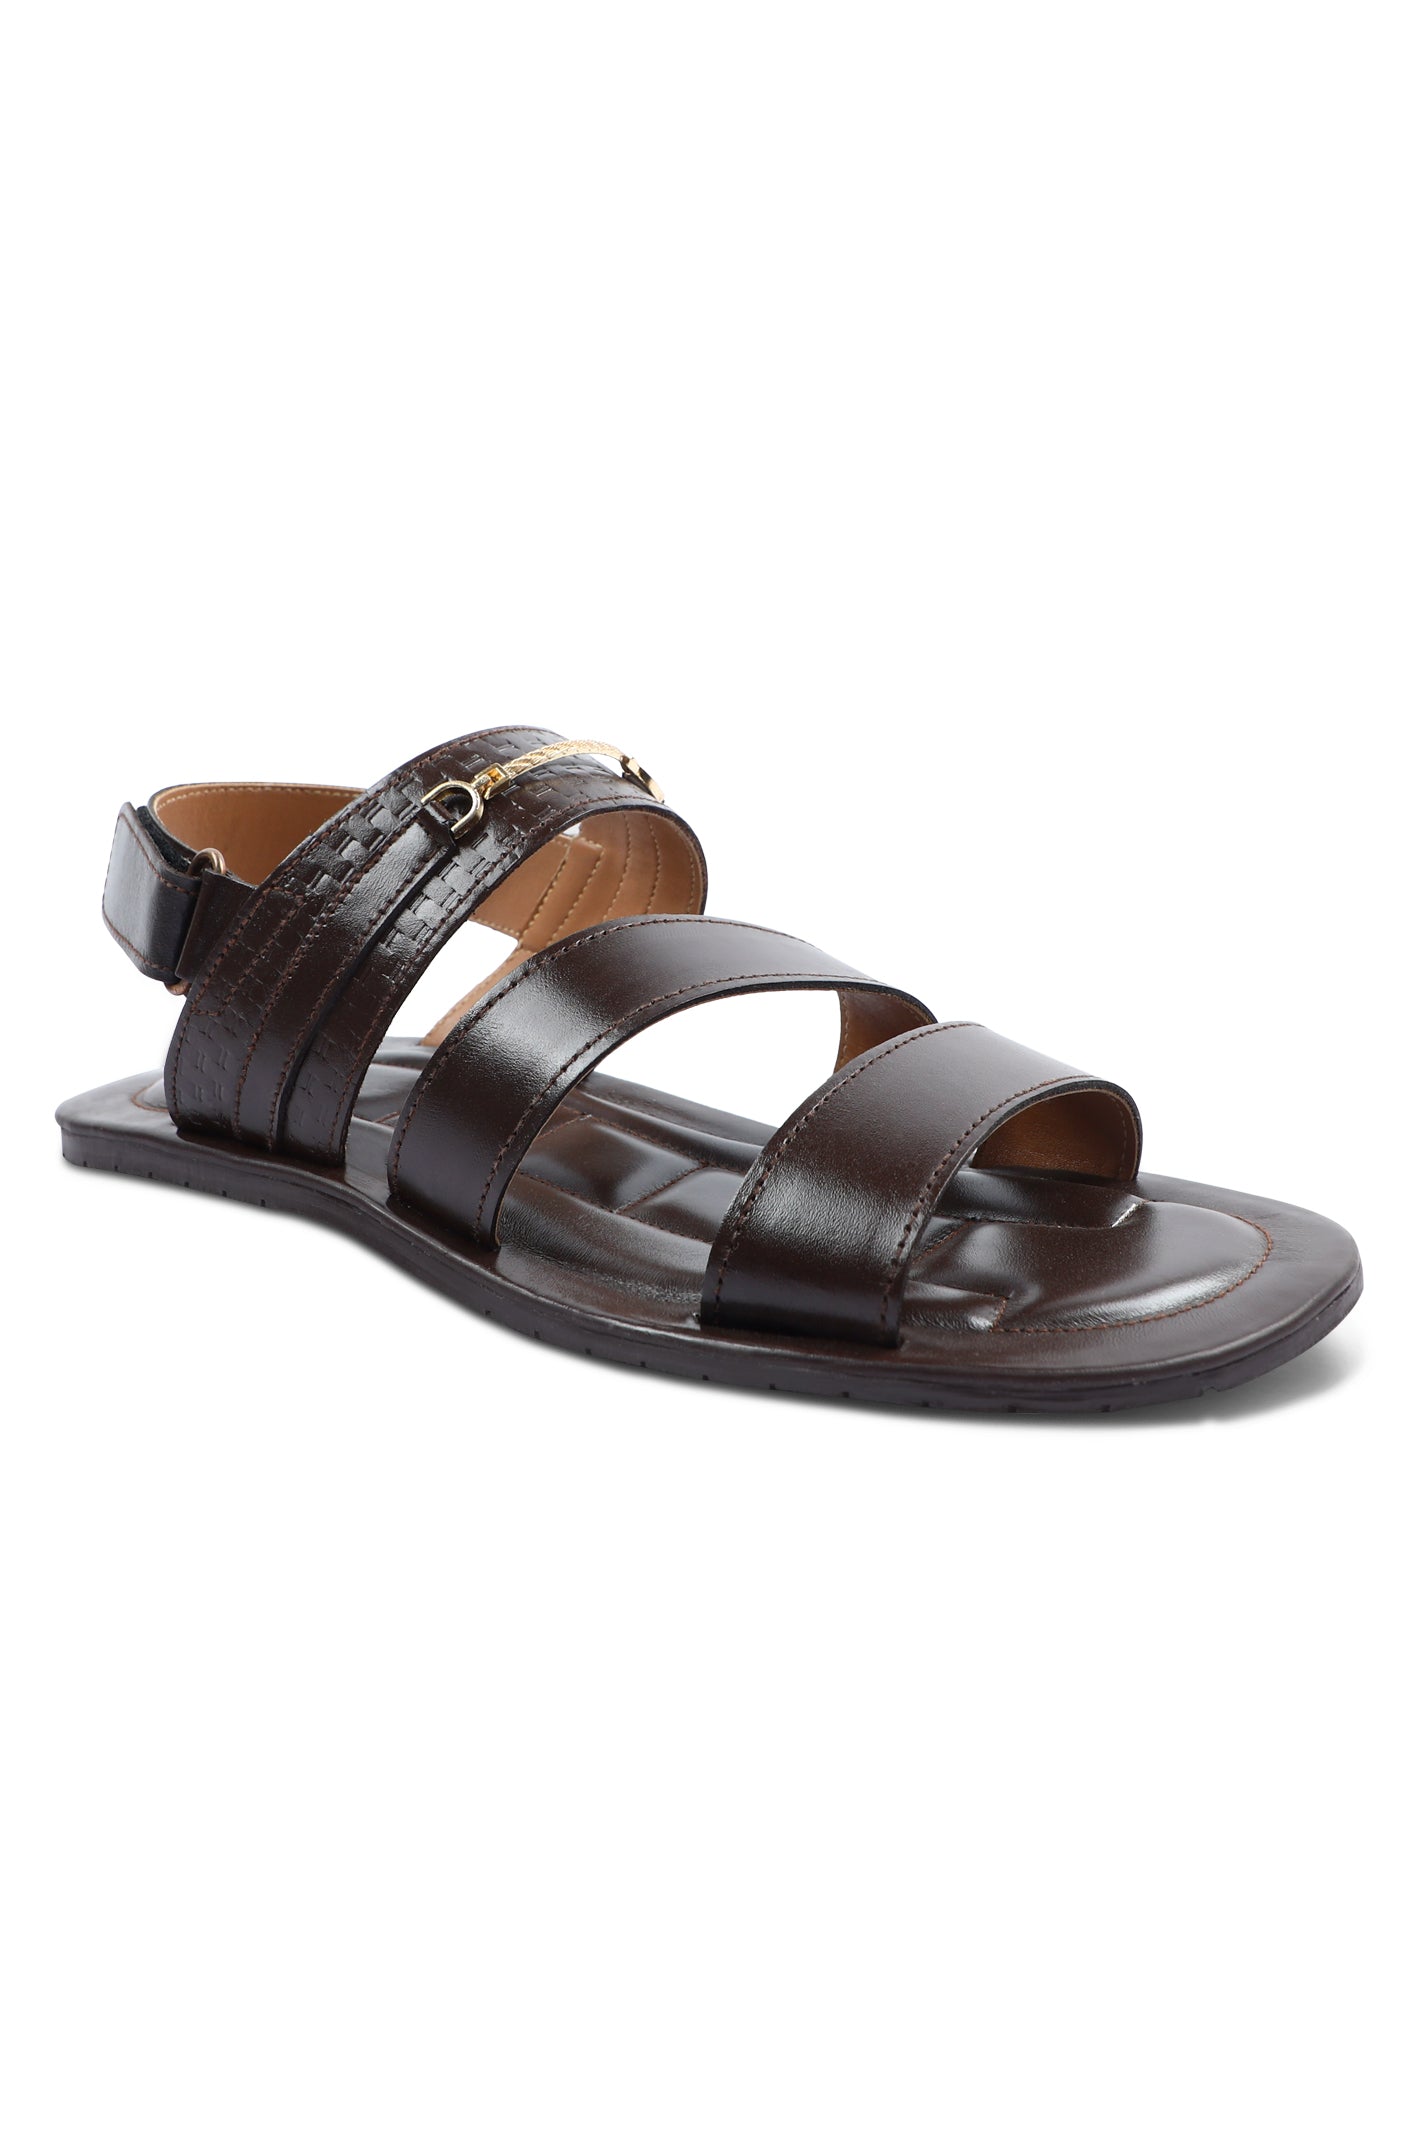 French Emporio Men Sandals SKU: SLD-0028-BROWN - Diners